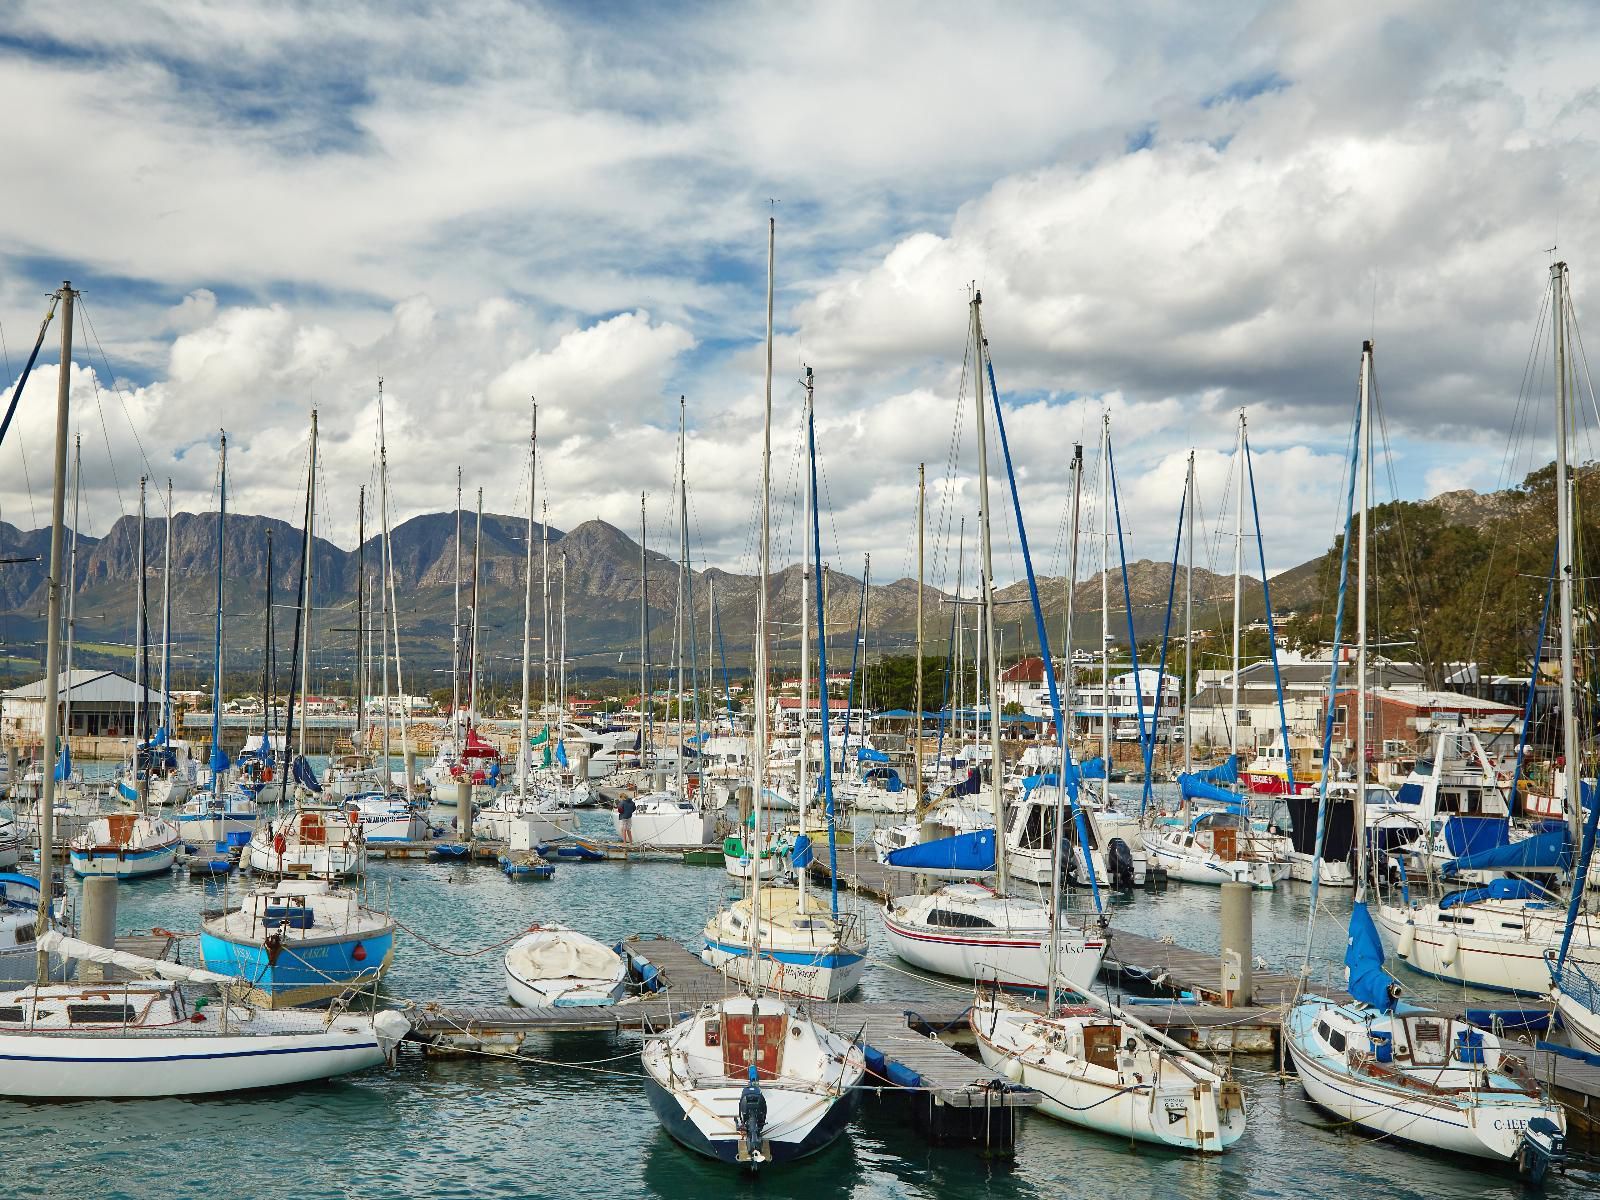 Cape Gordonia Gordons Bay Western Cape South Africa Boat, Vehicle, Harbor, Waters, City, Nature, Architecture, Building